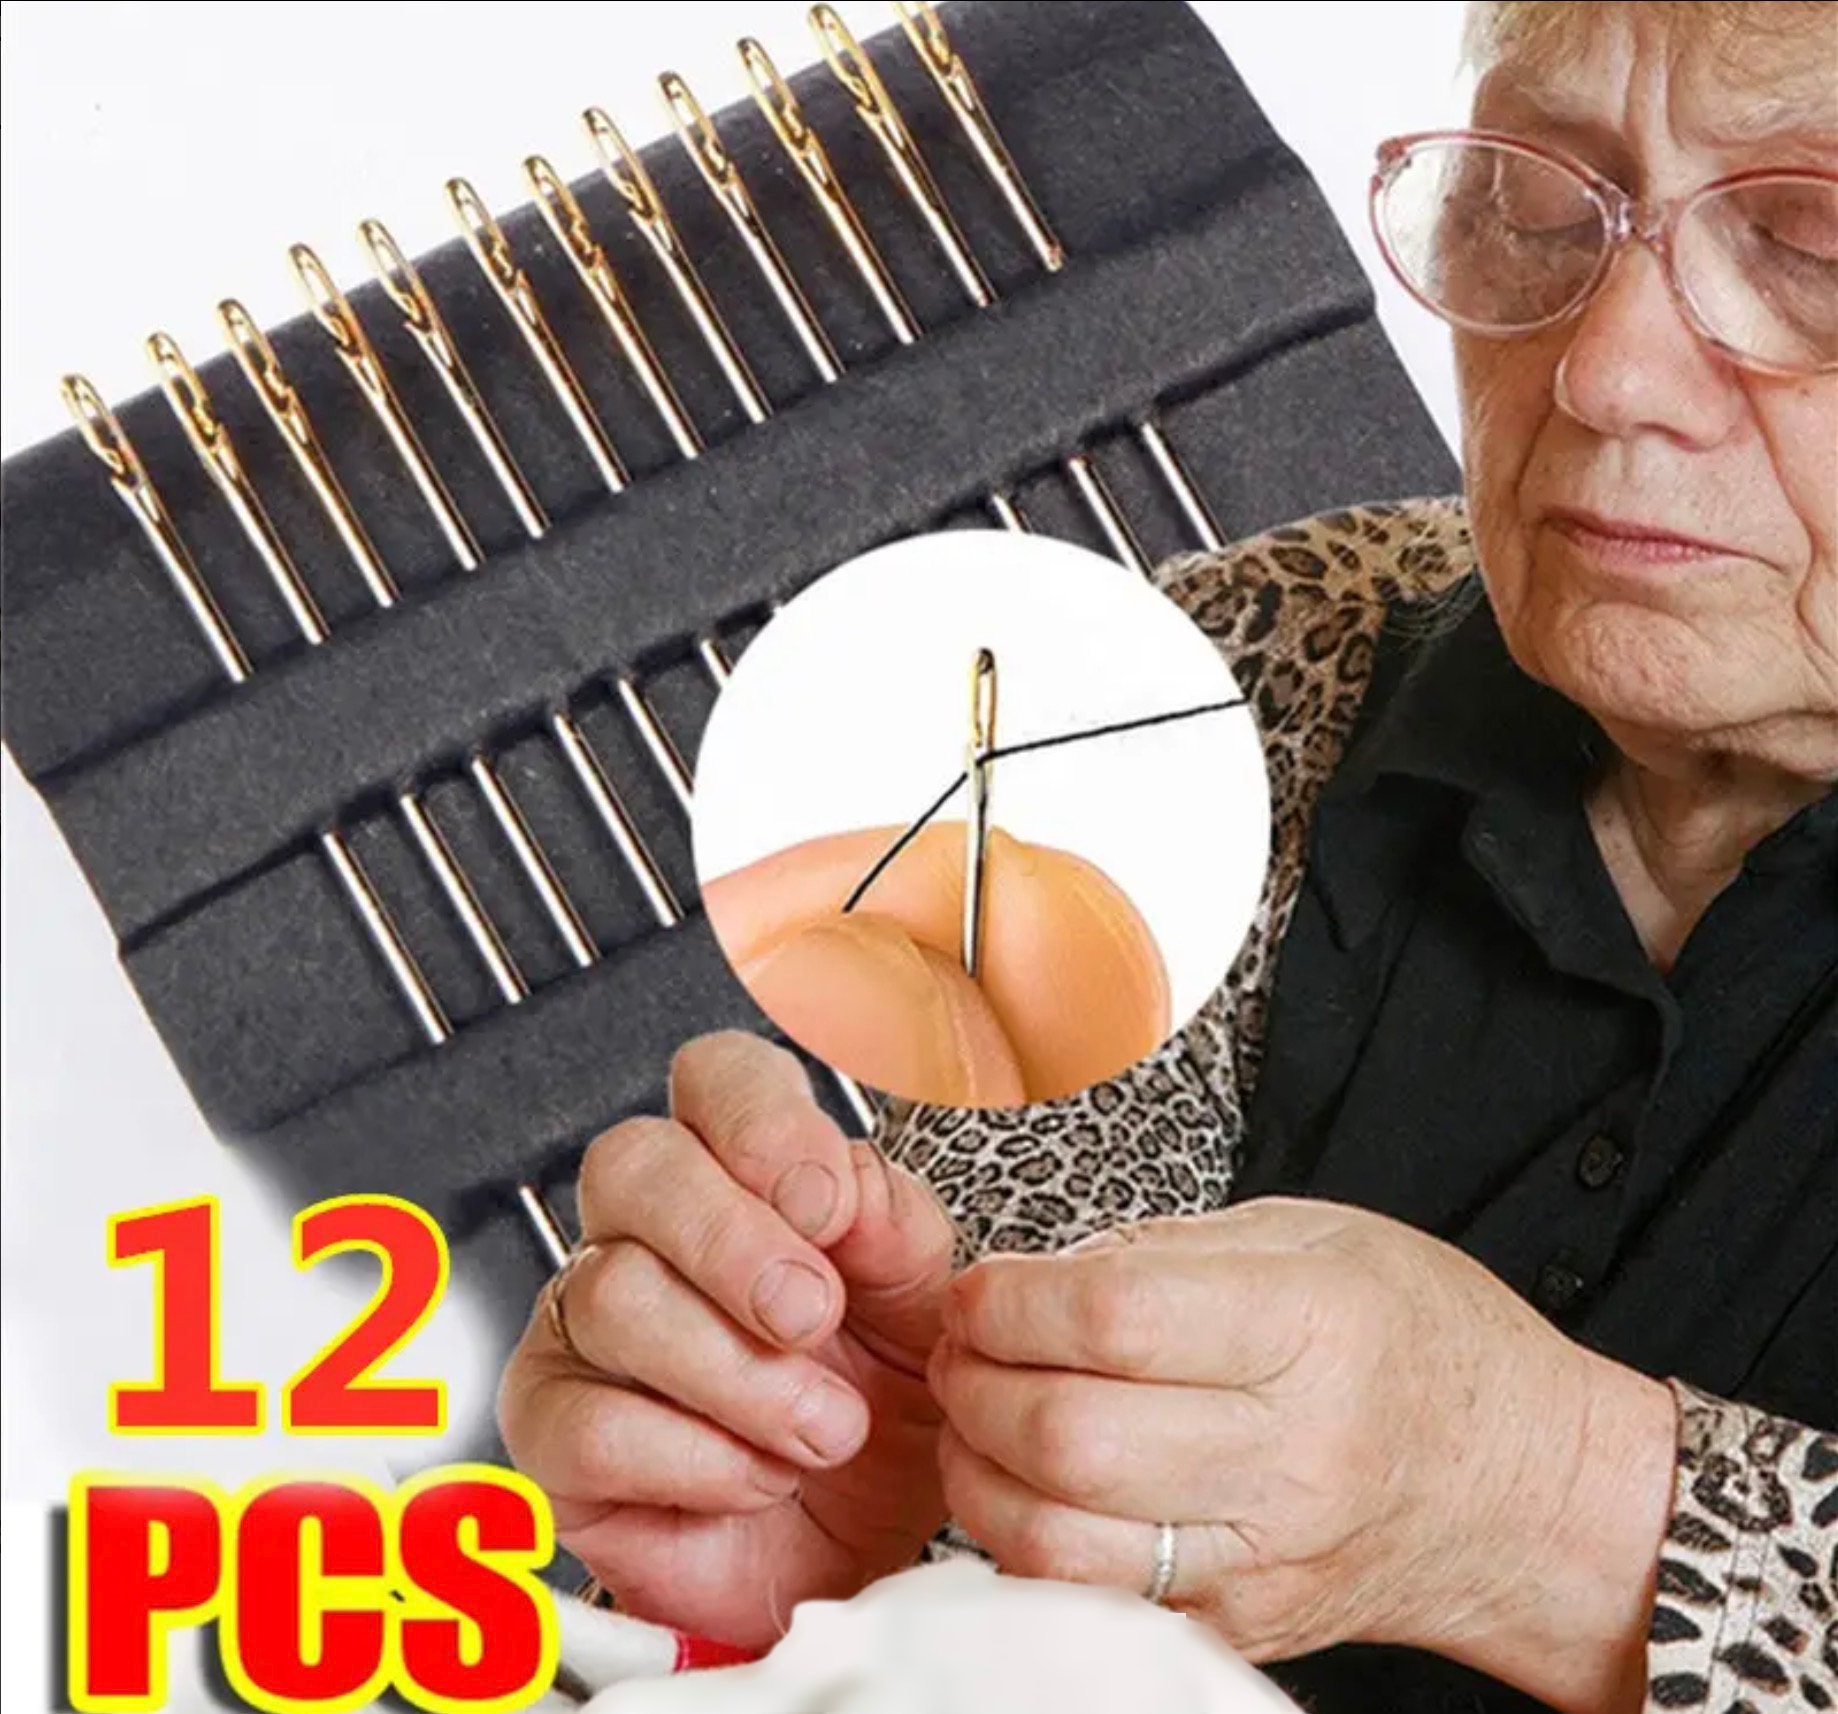 Easy to Thread 12pcs Hand Sewing Needles With Storage Box 